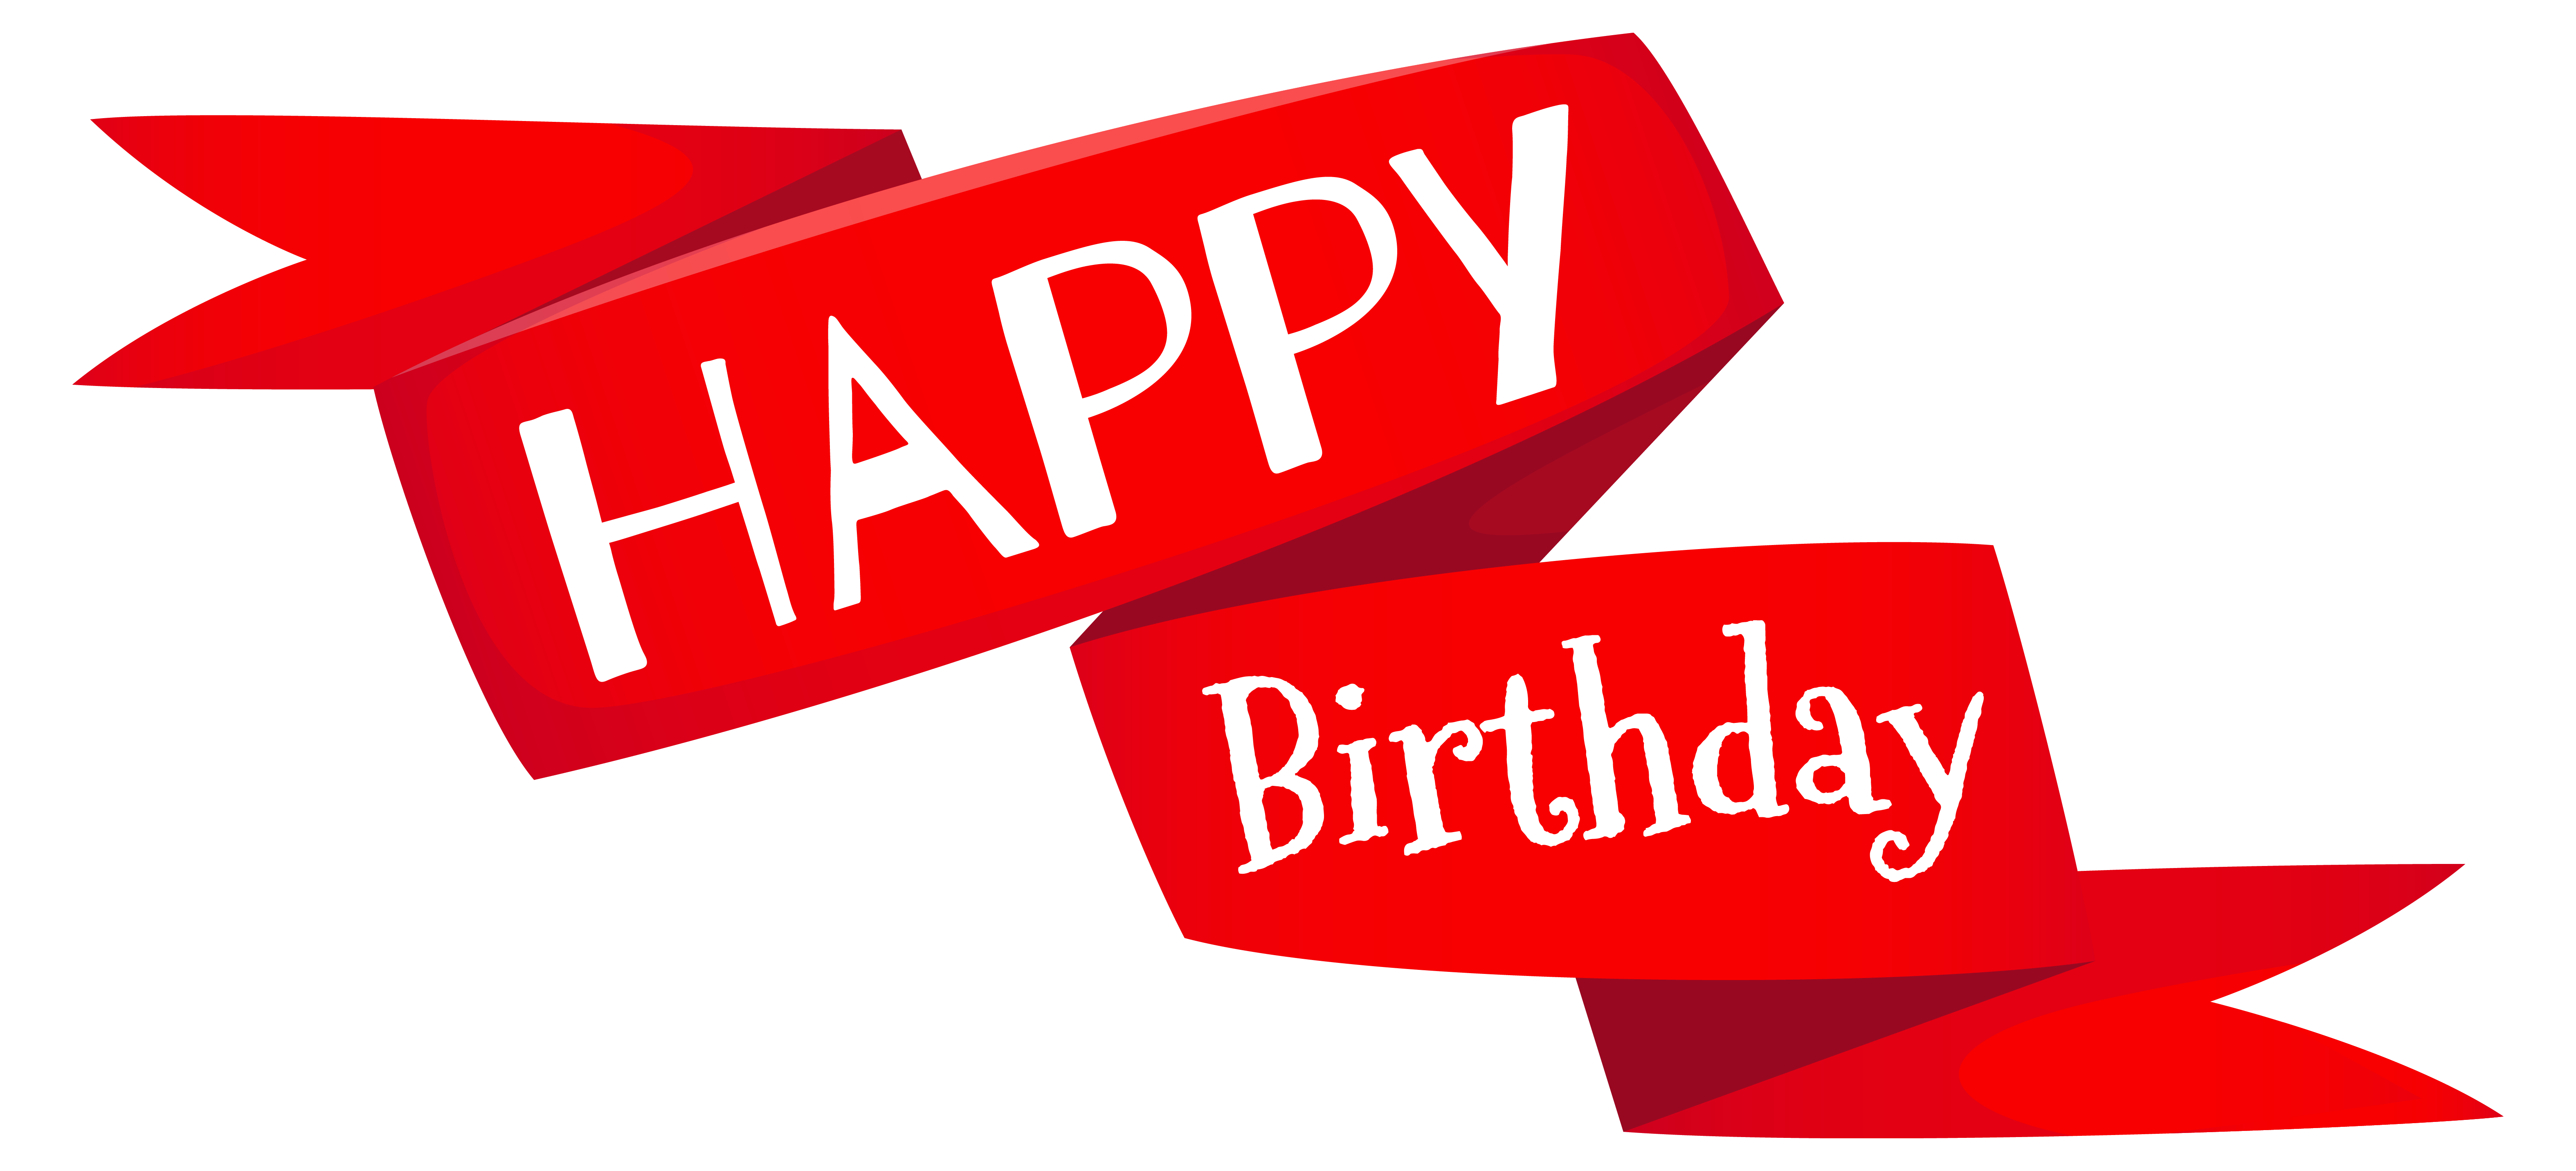 Clipart banner plain. Red happy birthday png